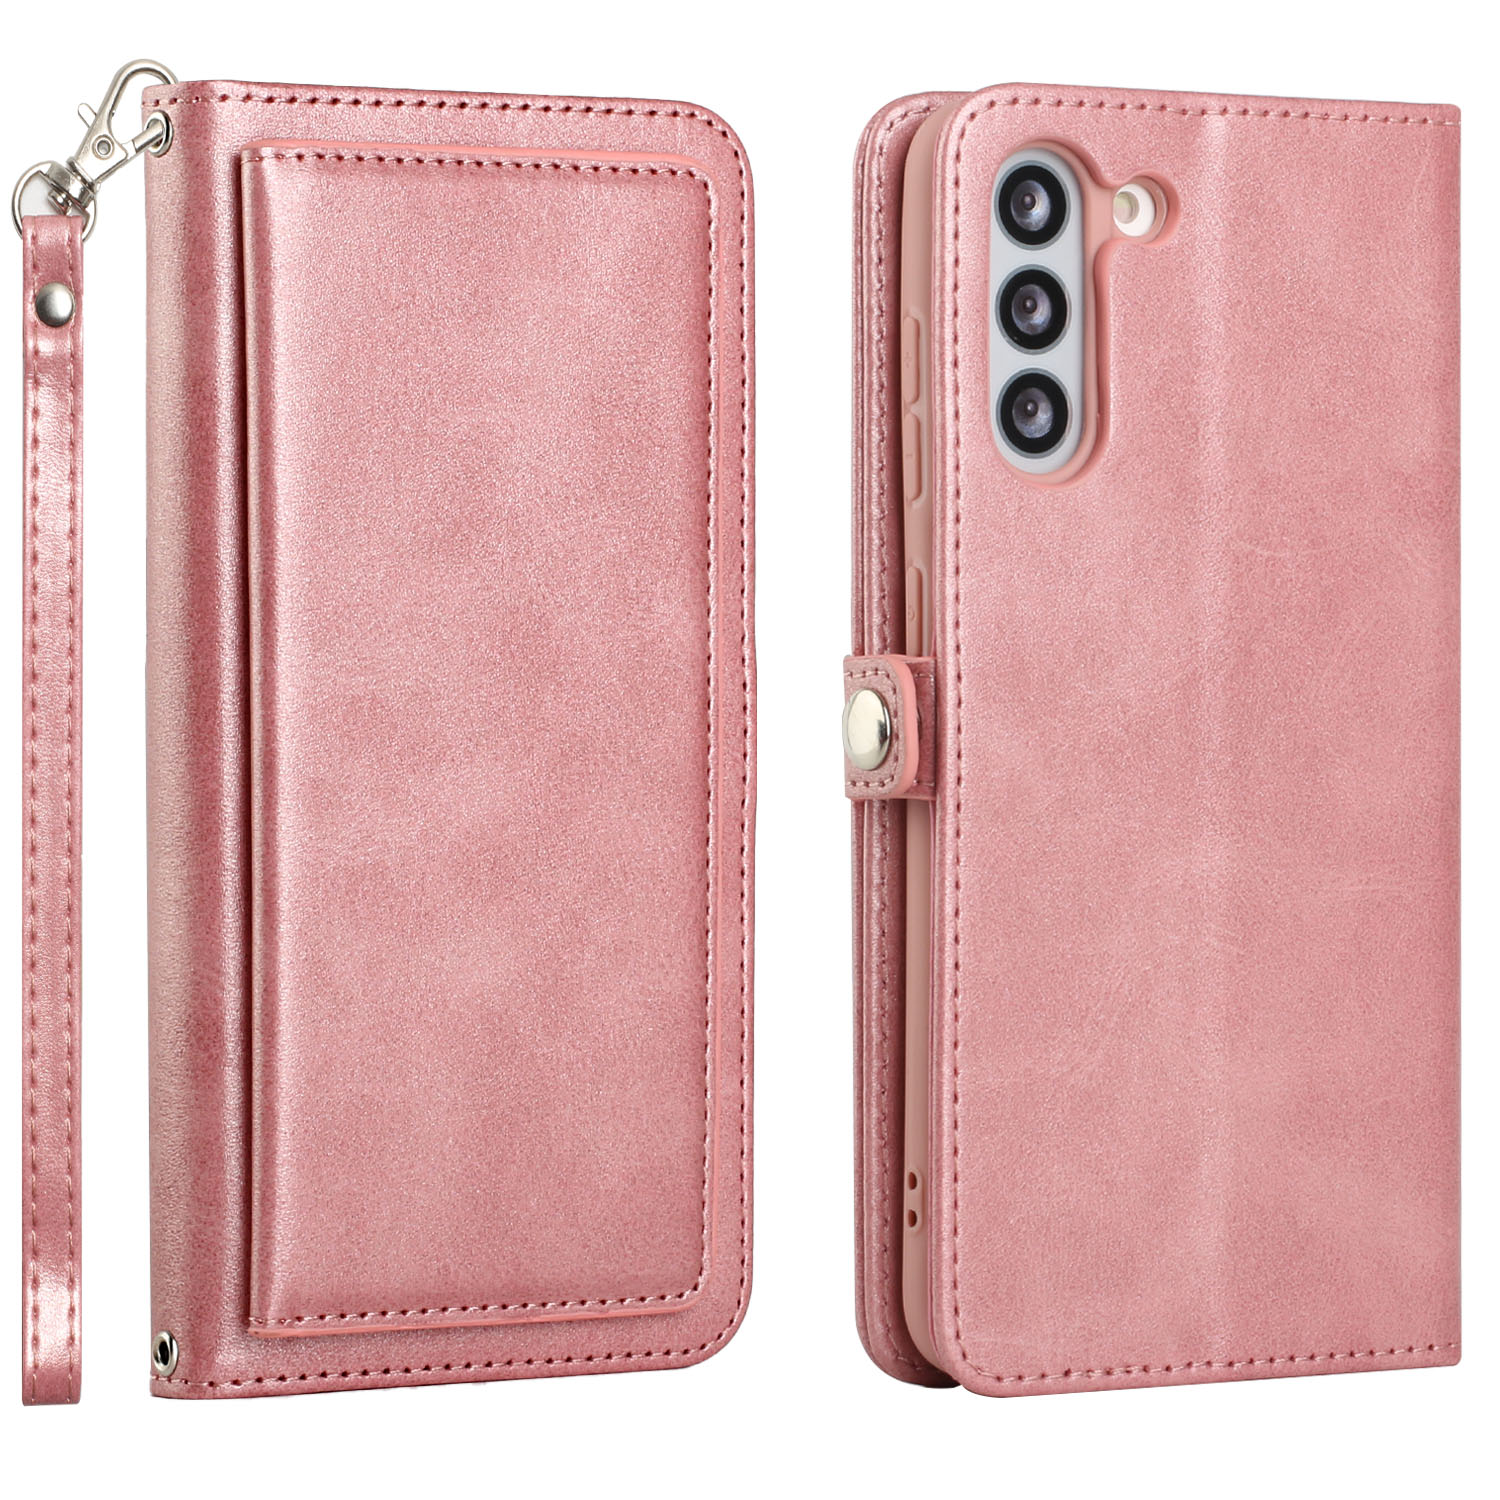 Premium PU Leather Folio WALLET Front Cover Case for Galaxy S21 FE (Pink)